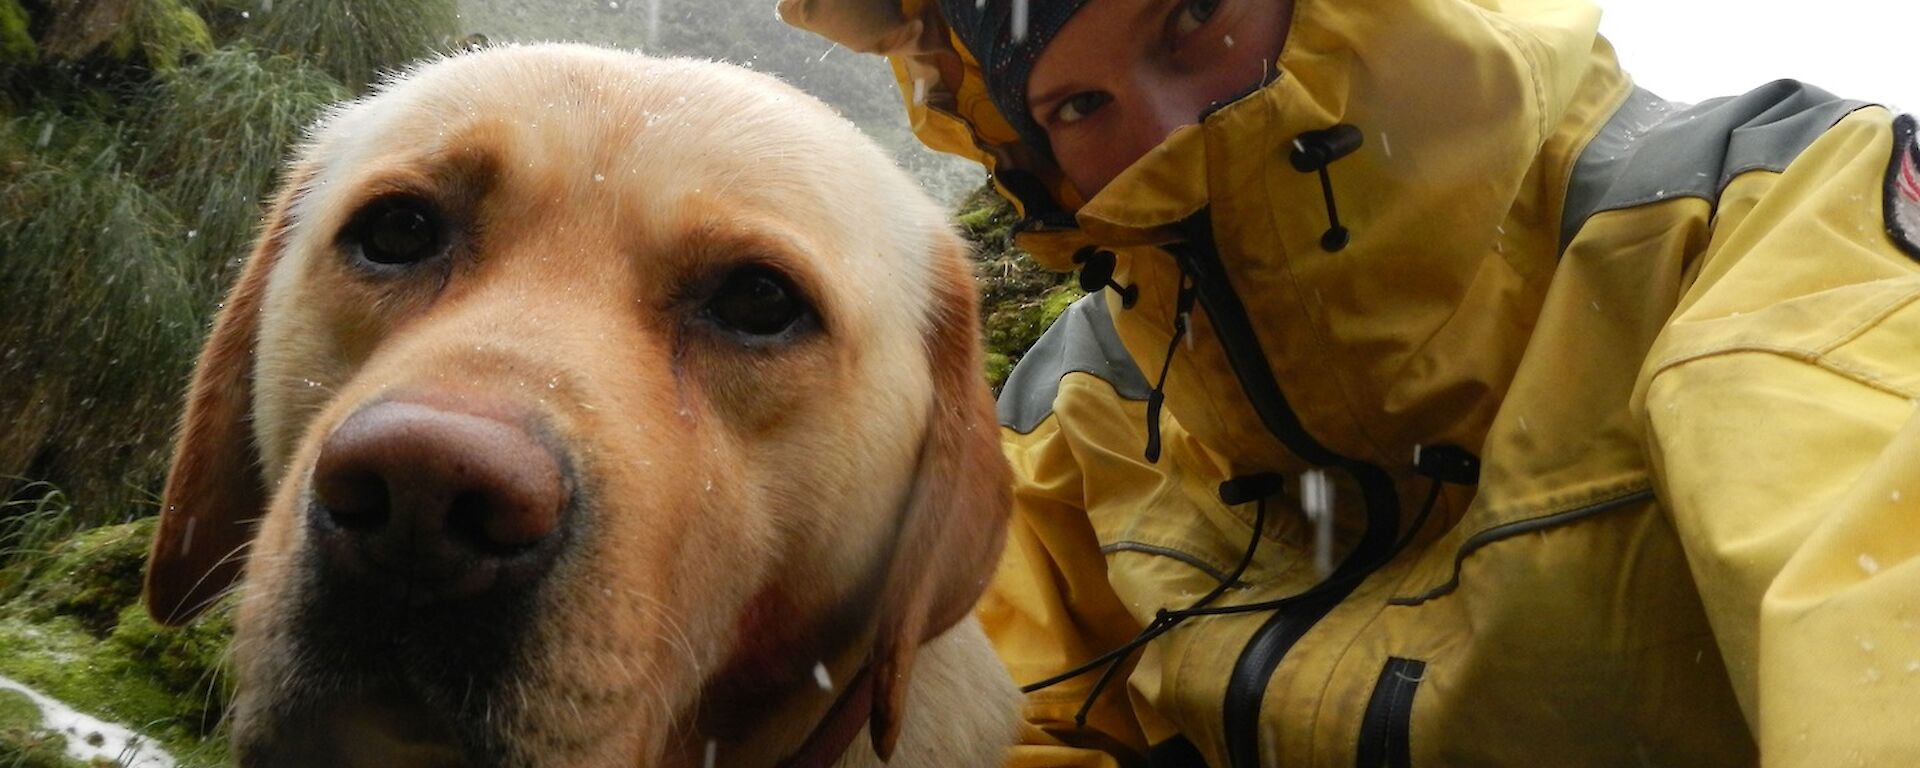 Karen, dressed in her yellow wet weather gear, and Finn shelter from a hail storm